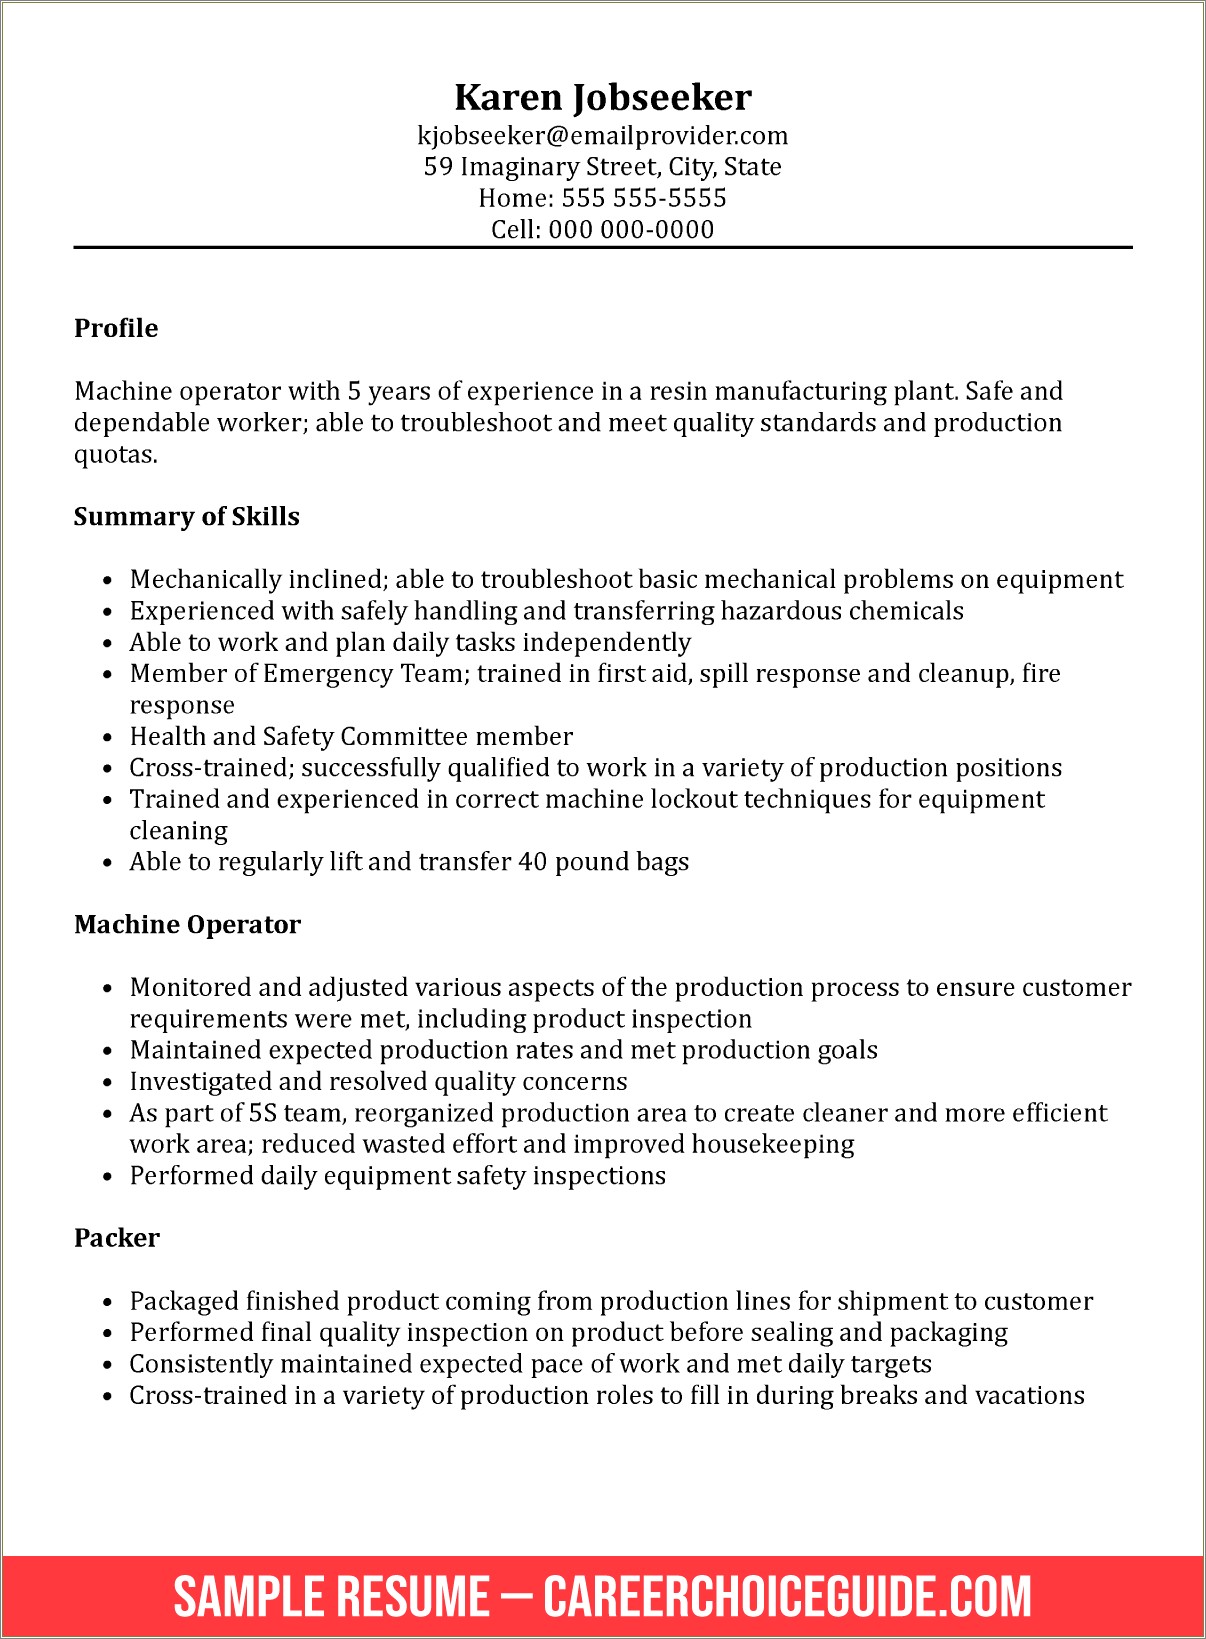 Does A Functional Resume Need A Work Experience